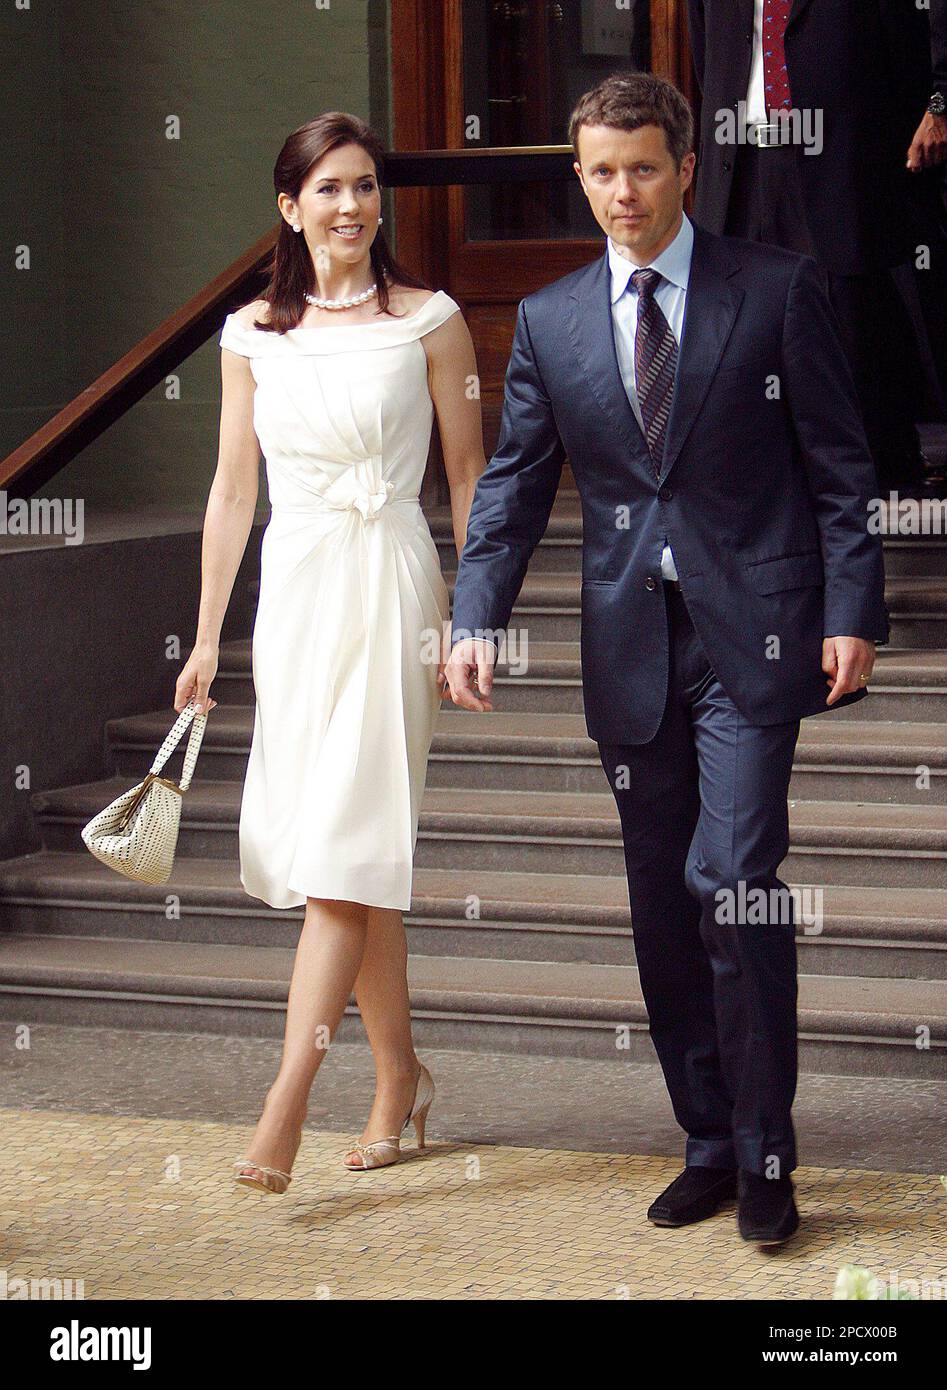 Denmark's Australian-born Crown Princess Mary and Crown Prince Frederik visit the Ny Carlsberg Glyptotek Museum in Copenhagen, Denmark , Tuesday, June 27 2006. The museum was reopened Tuesday after a 3 year renovation. The museum is best known for its impressionist paintings, antique sculptures, an Etruscan collection and Danish art.(AP Photo/John McConnico) Foto Stock